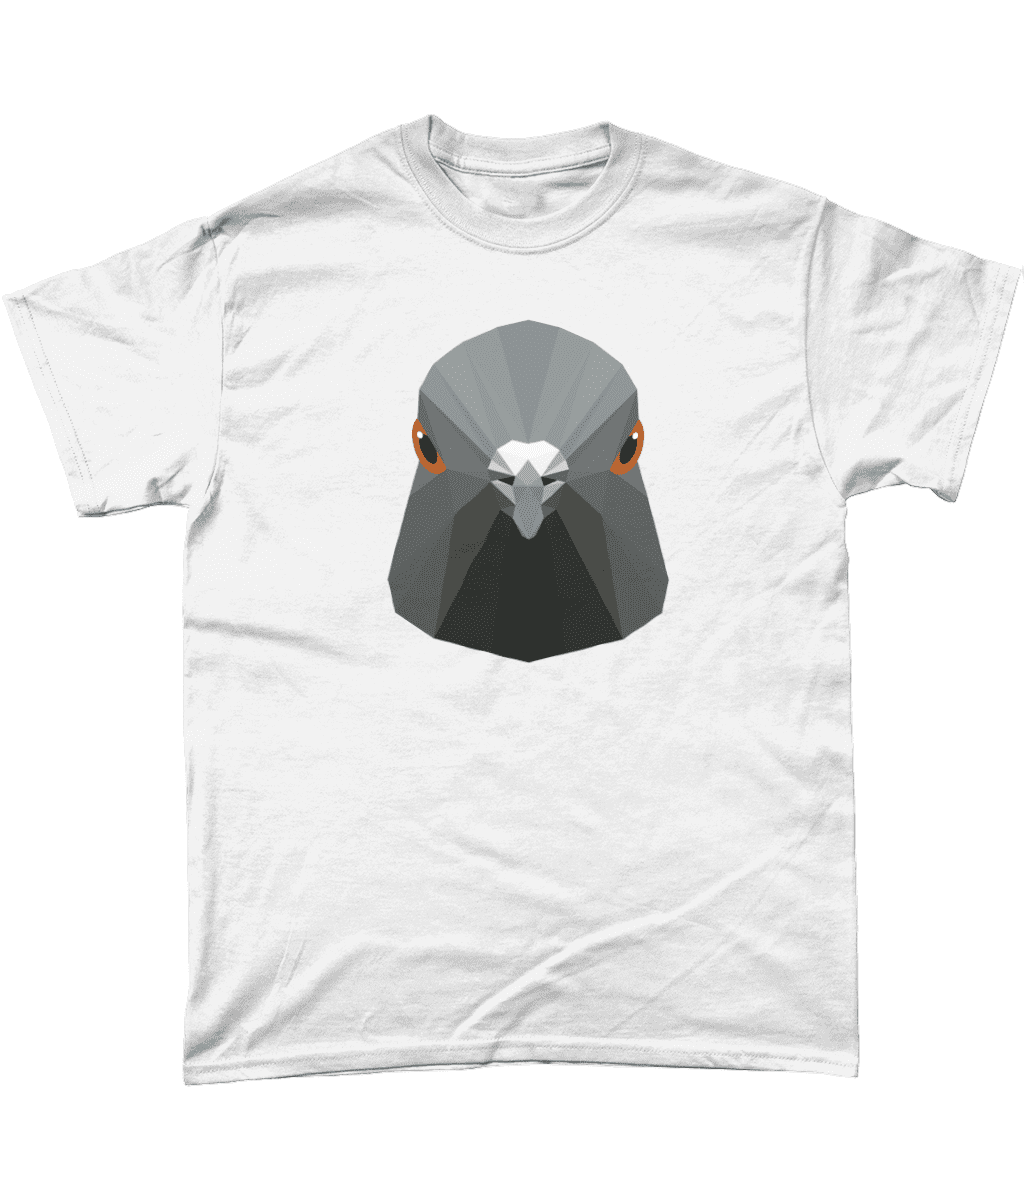 Low Poly Pigeon T Shirt White